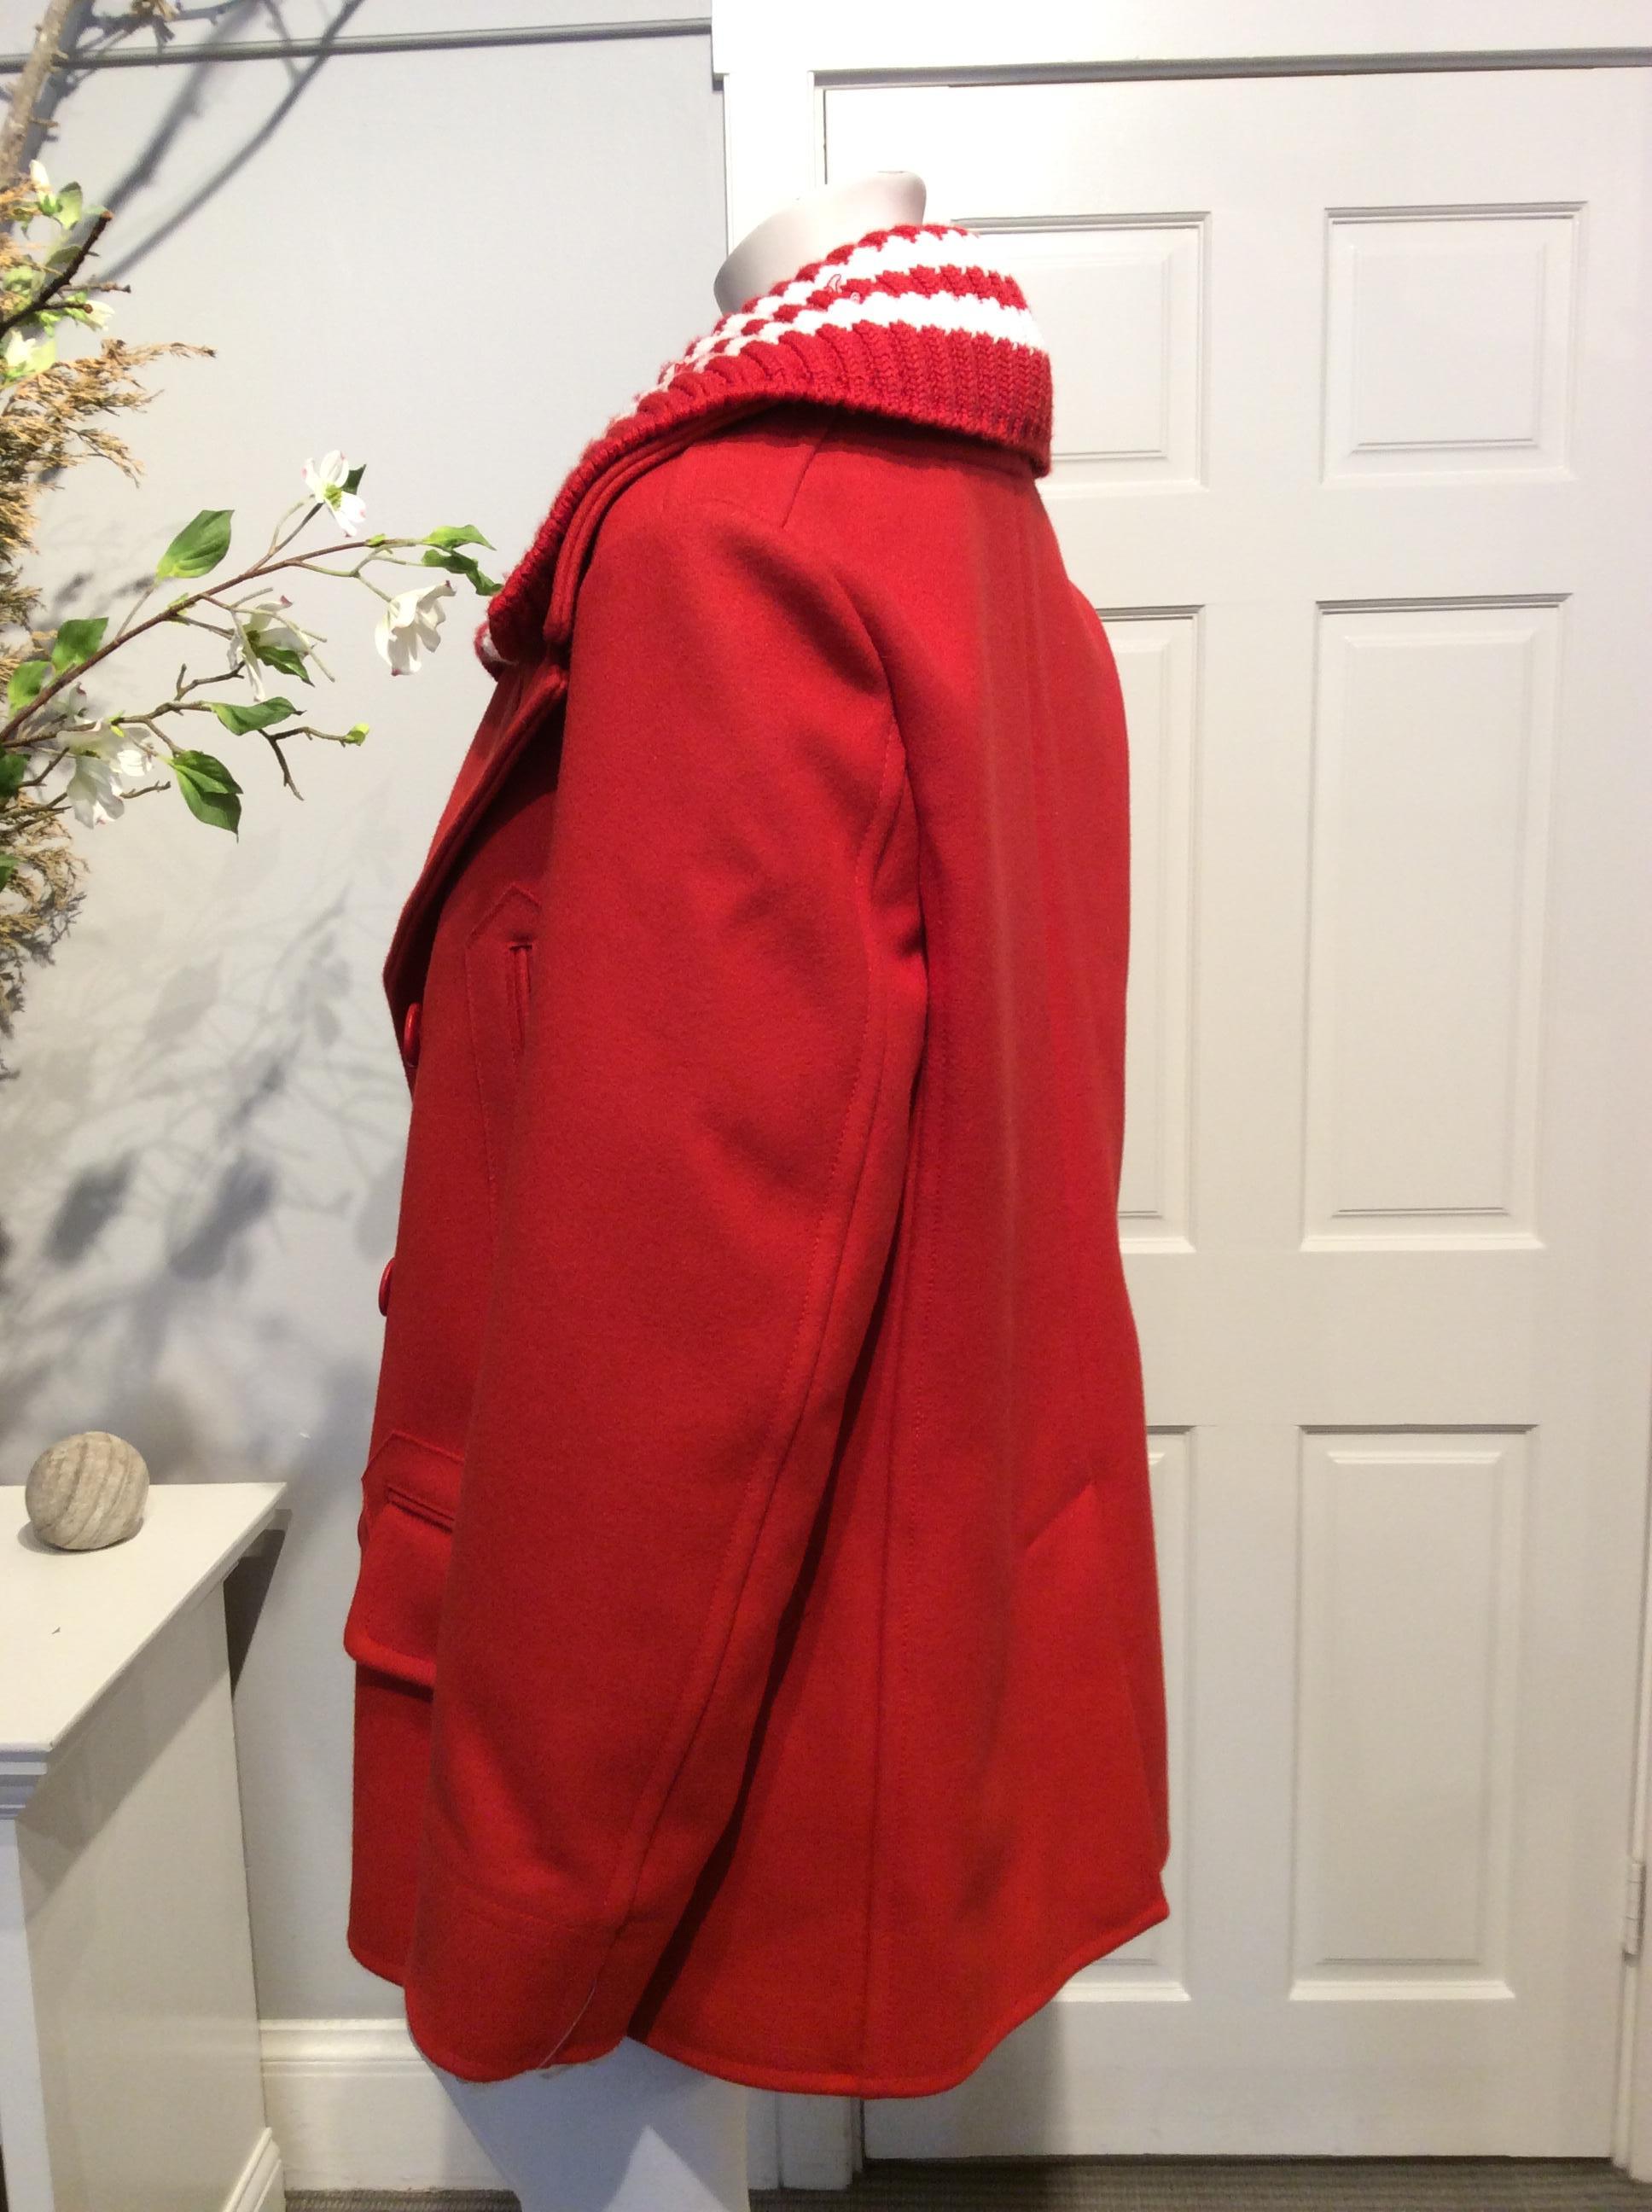 Givenchy Double Breasted Red Pea Coat, Fall / Winter 2017  In Excellent Condition For Sale In San Francisco, CA